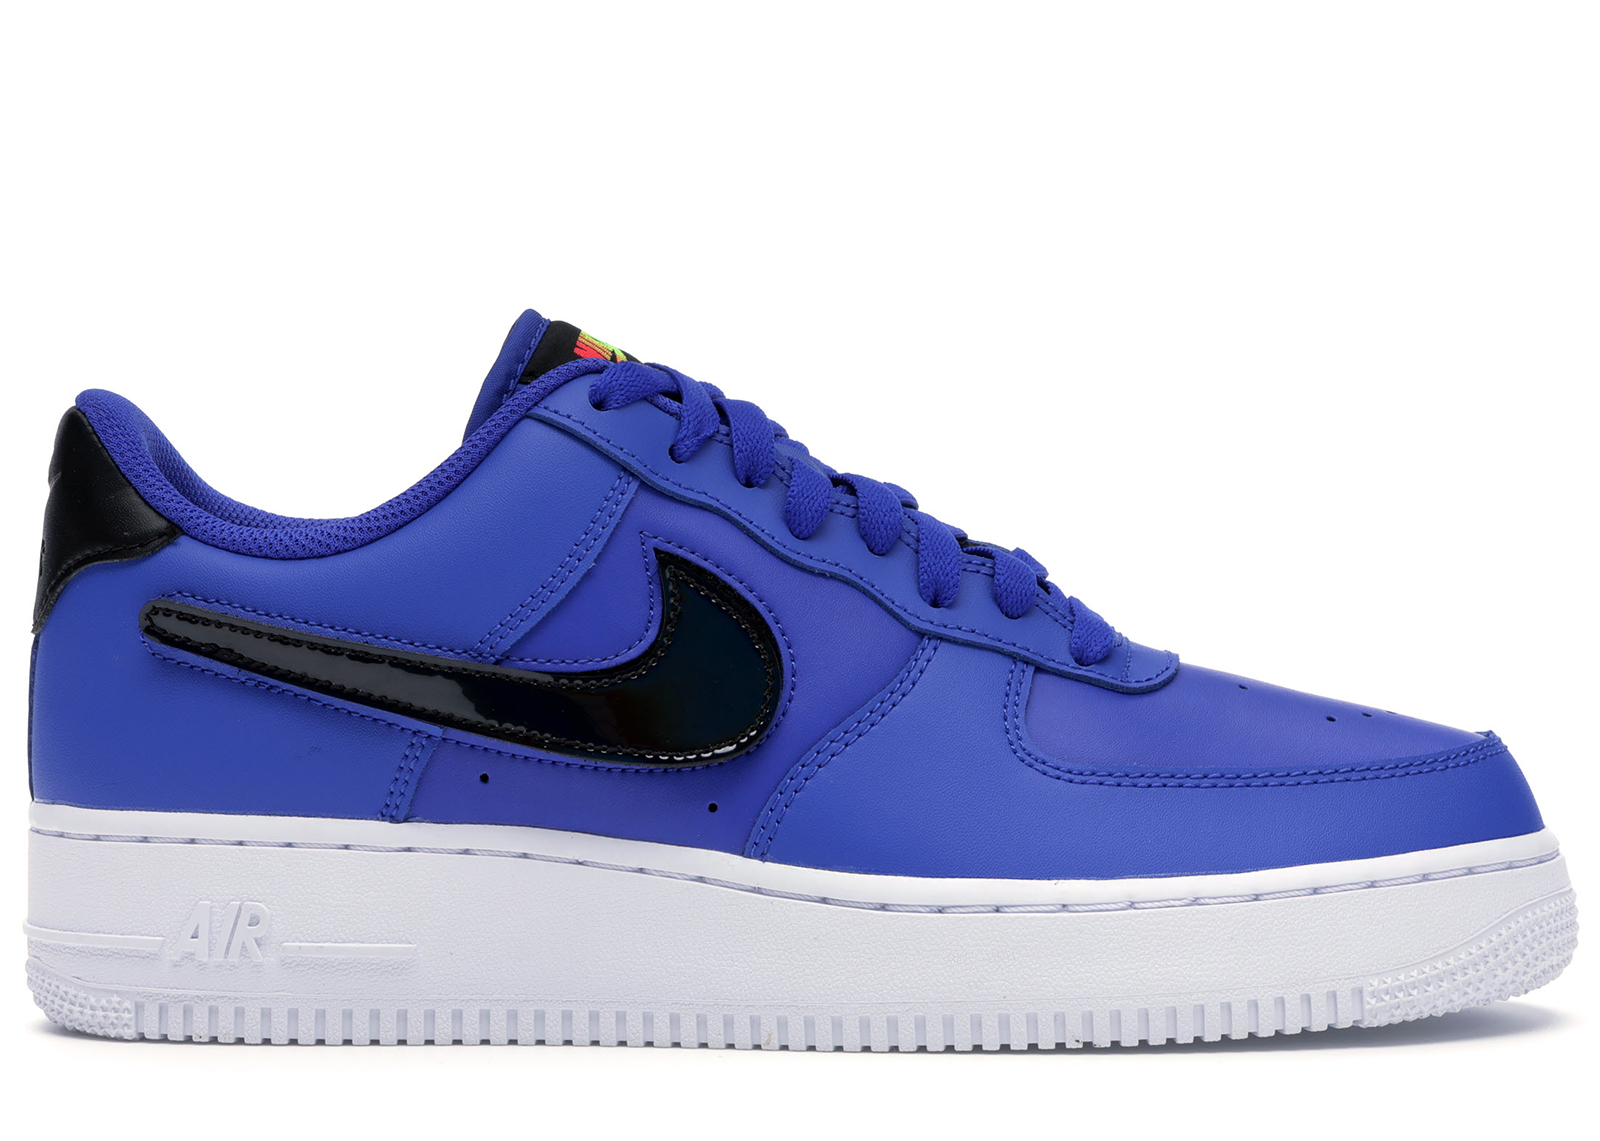 nike air force 1 low quickstrike removable swoosh